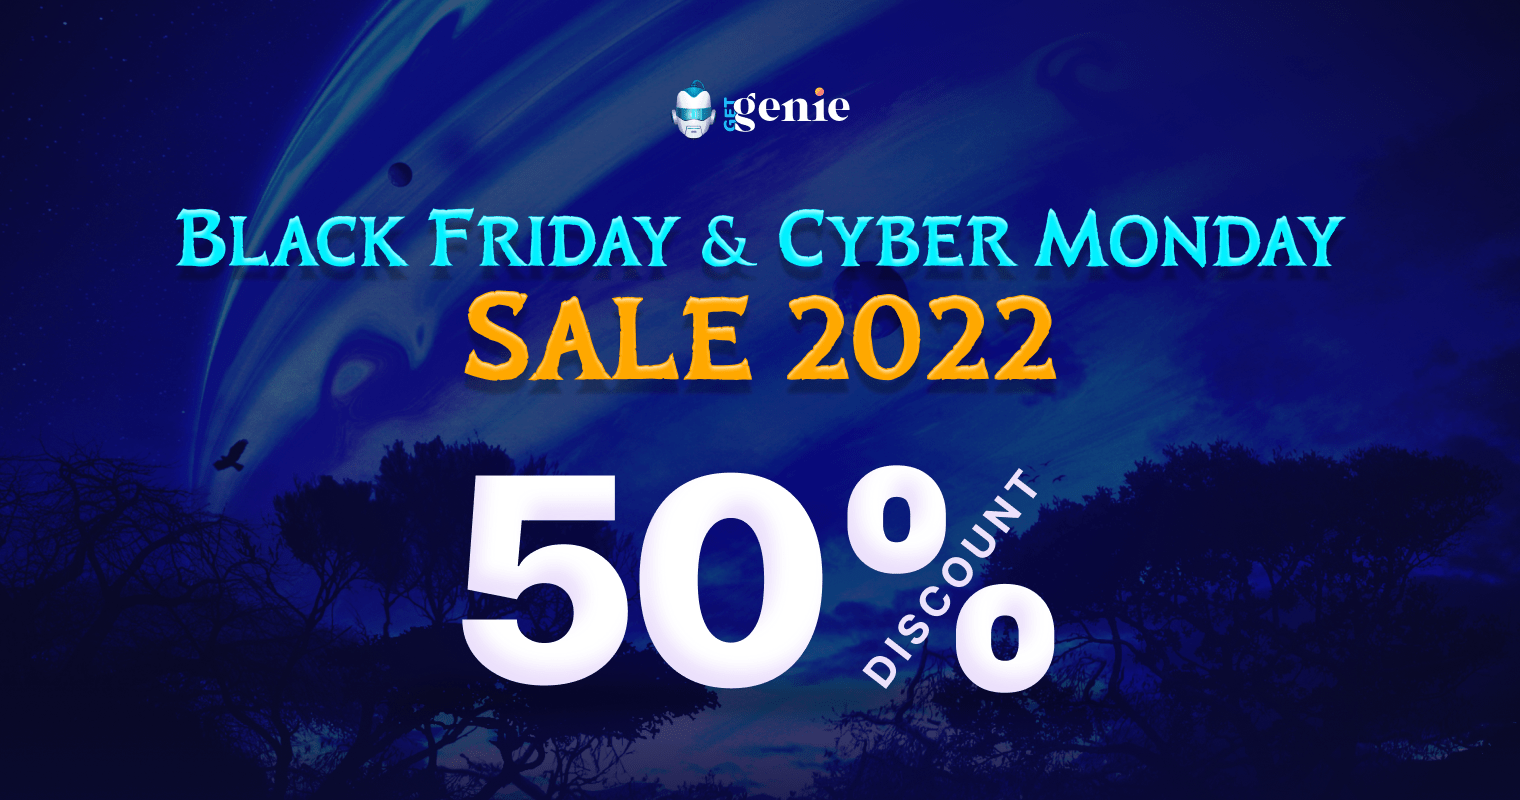 Get Genie Black Friday and Cybermonder software deal